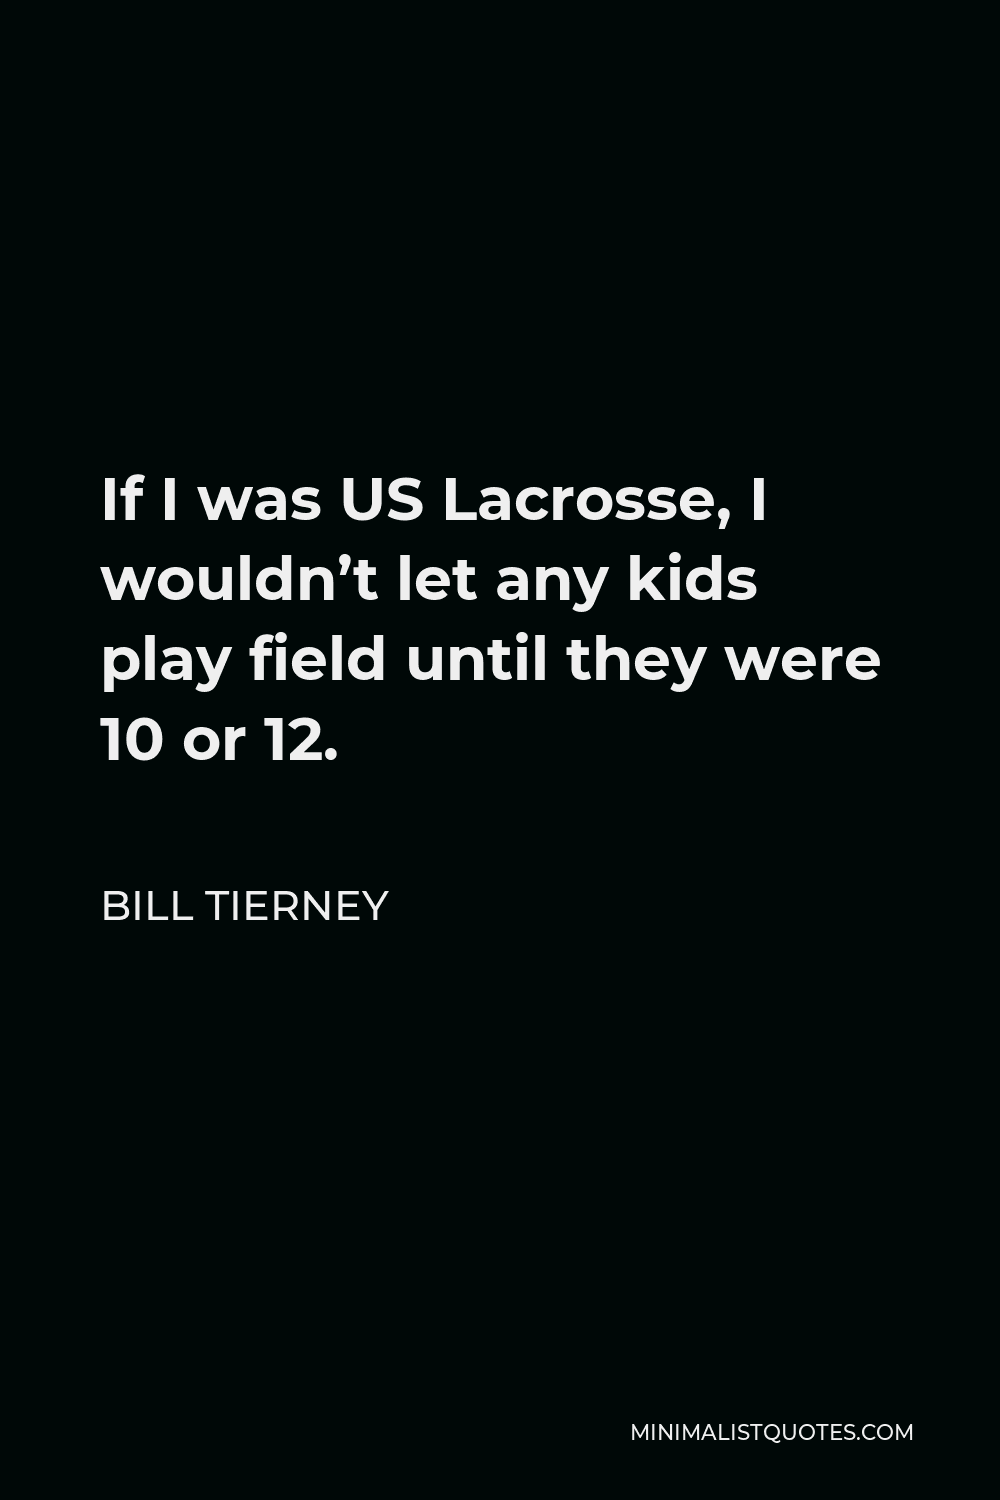 Bill Tierney Quote - If I was US Lacrosse, I wouldn’t let any kids play field until they were 10 or 12.